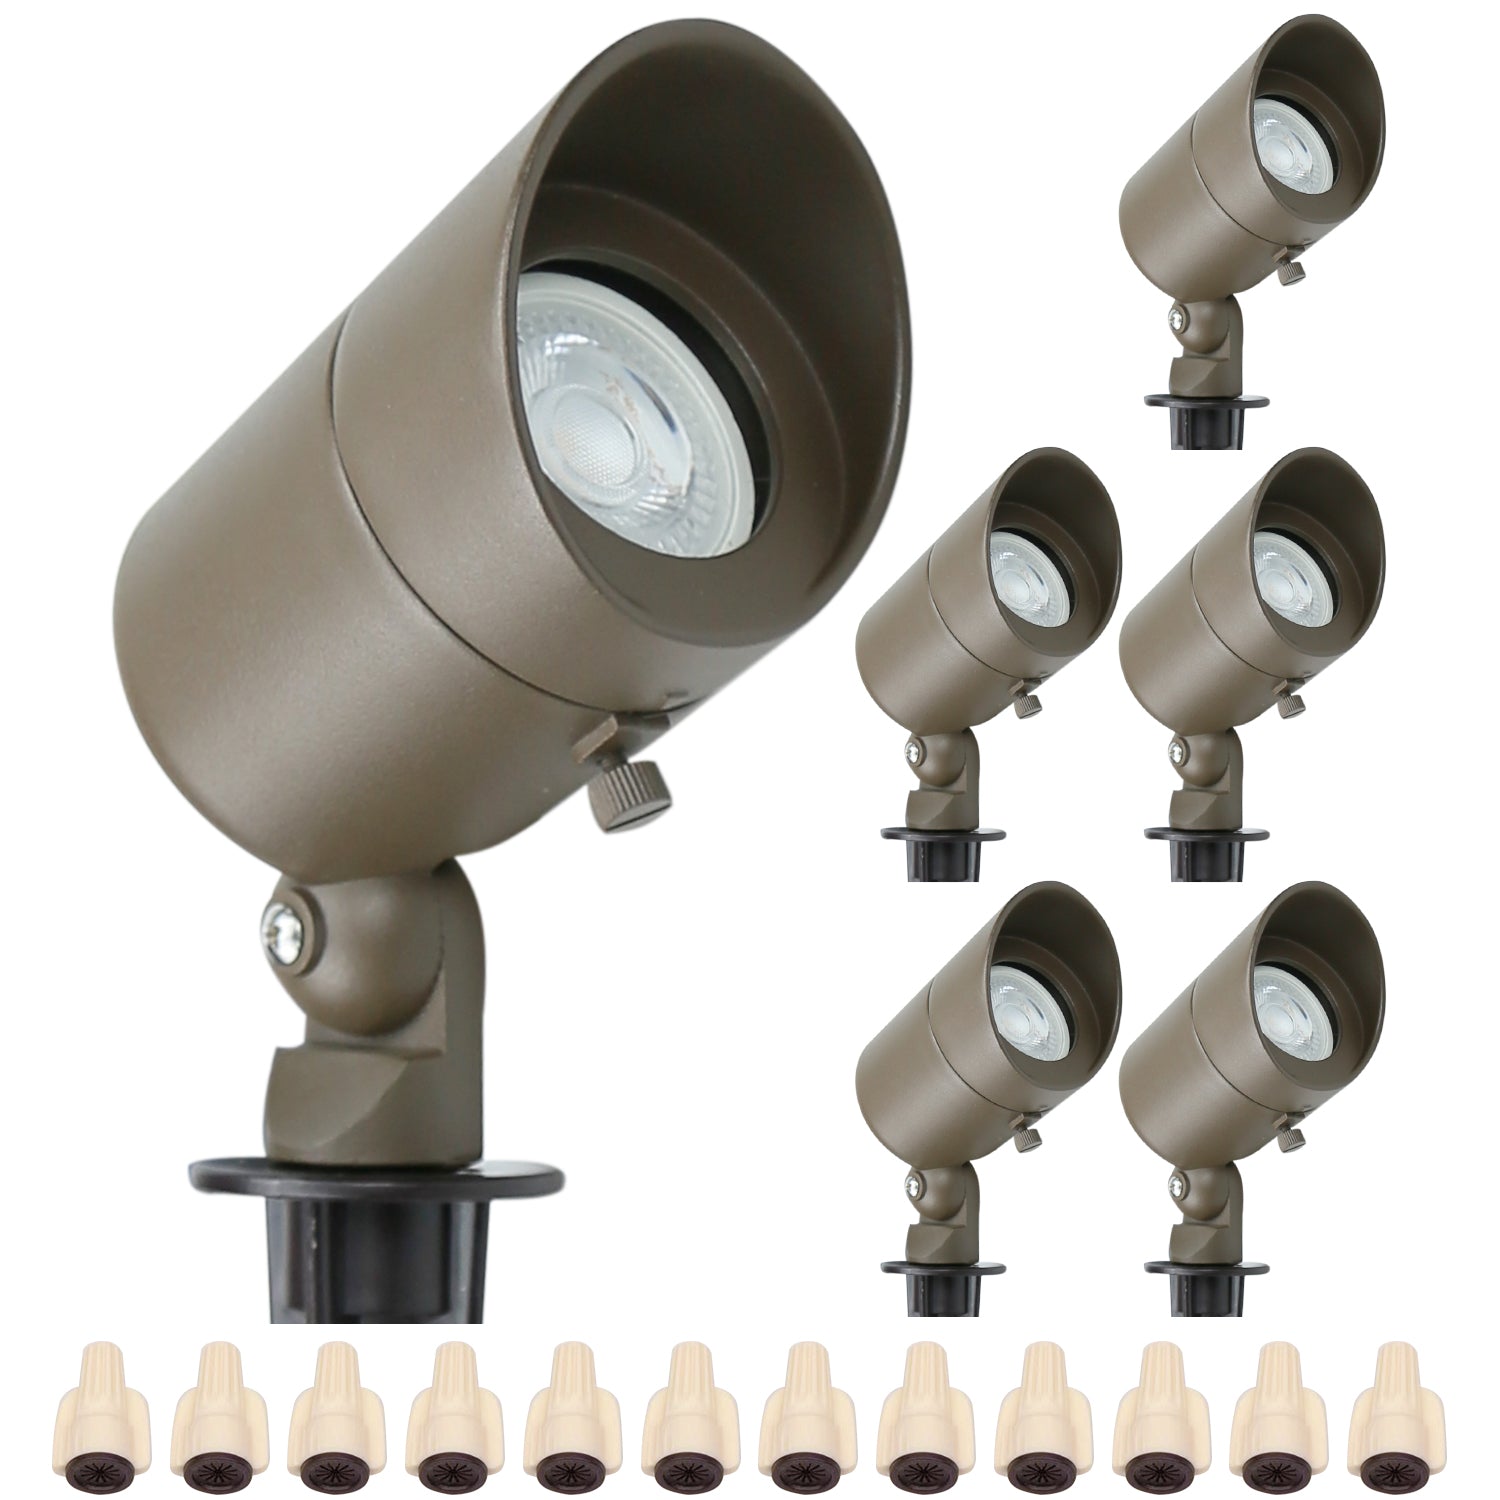 Lumina Lighting® 5W Low Voltage LED Spotlight | 12V Replaceable LED Bulb Included (Bronze, 6-Pack)